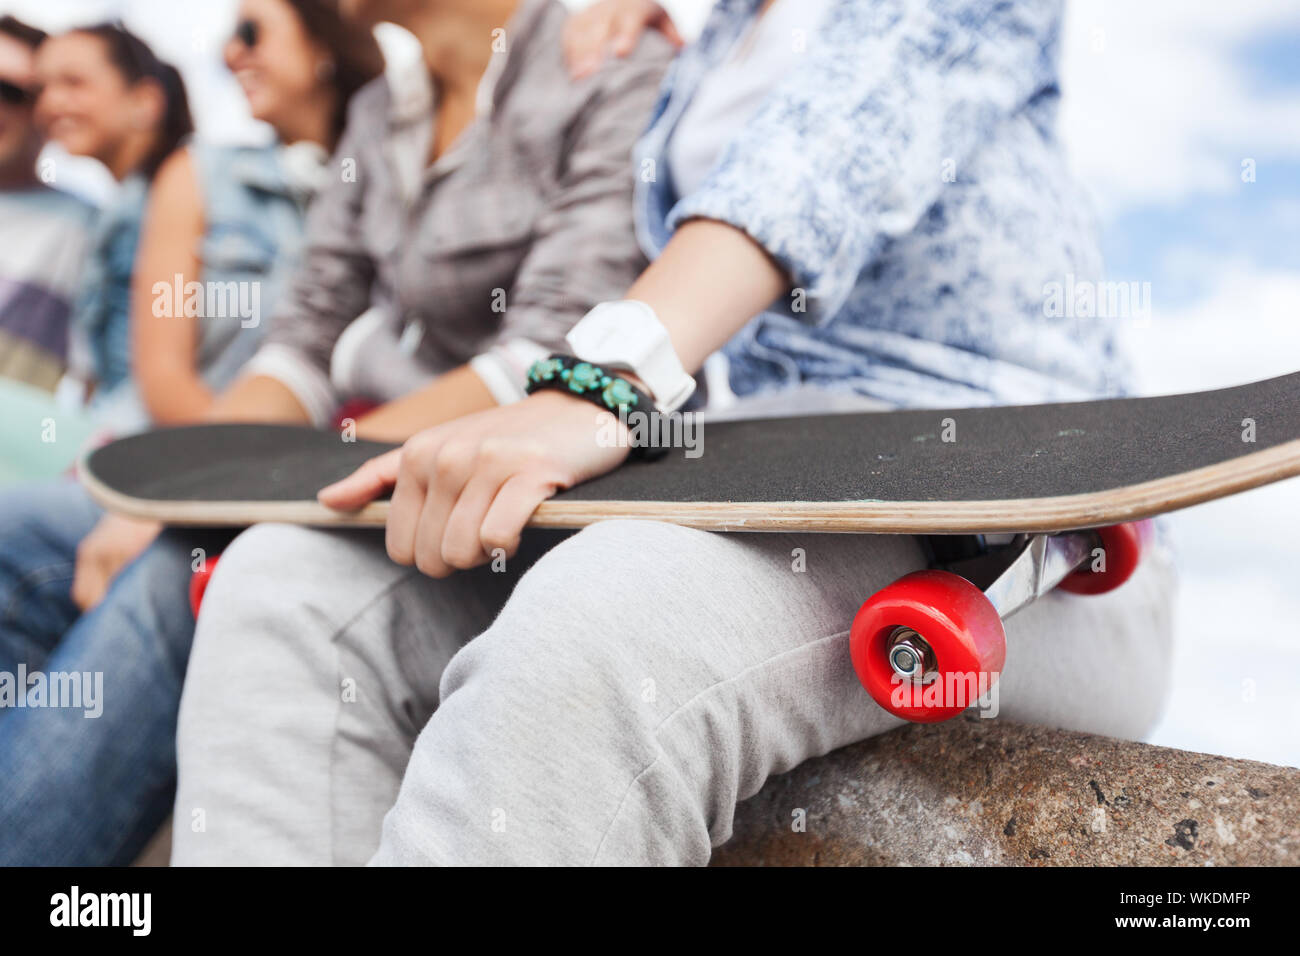 acticity and summer holiday concept - close up of female hand holding skateboard Stock Photo